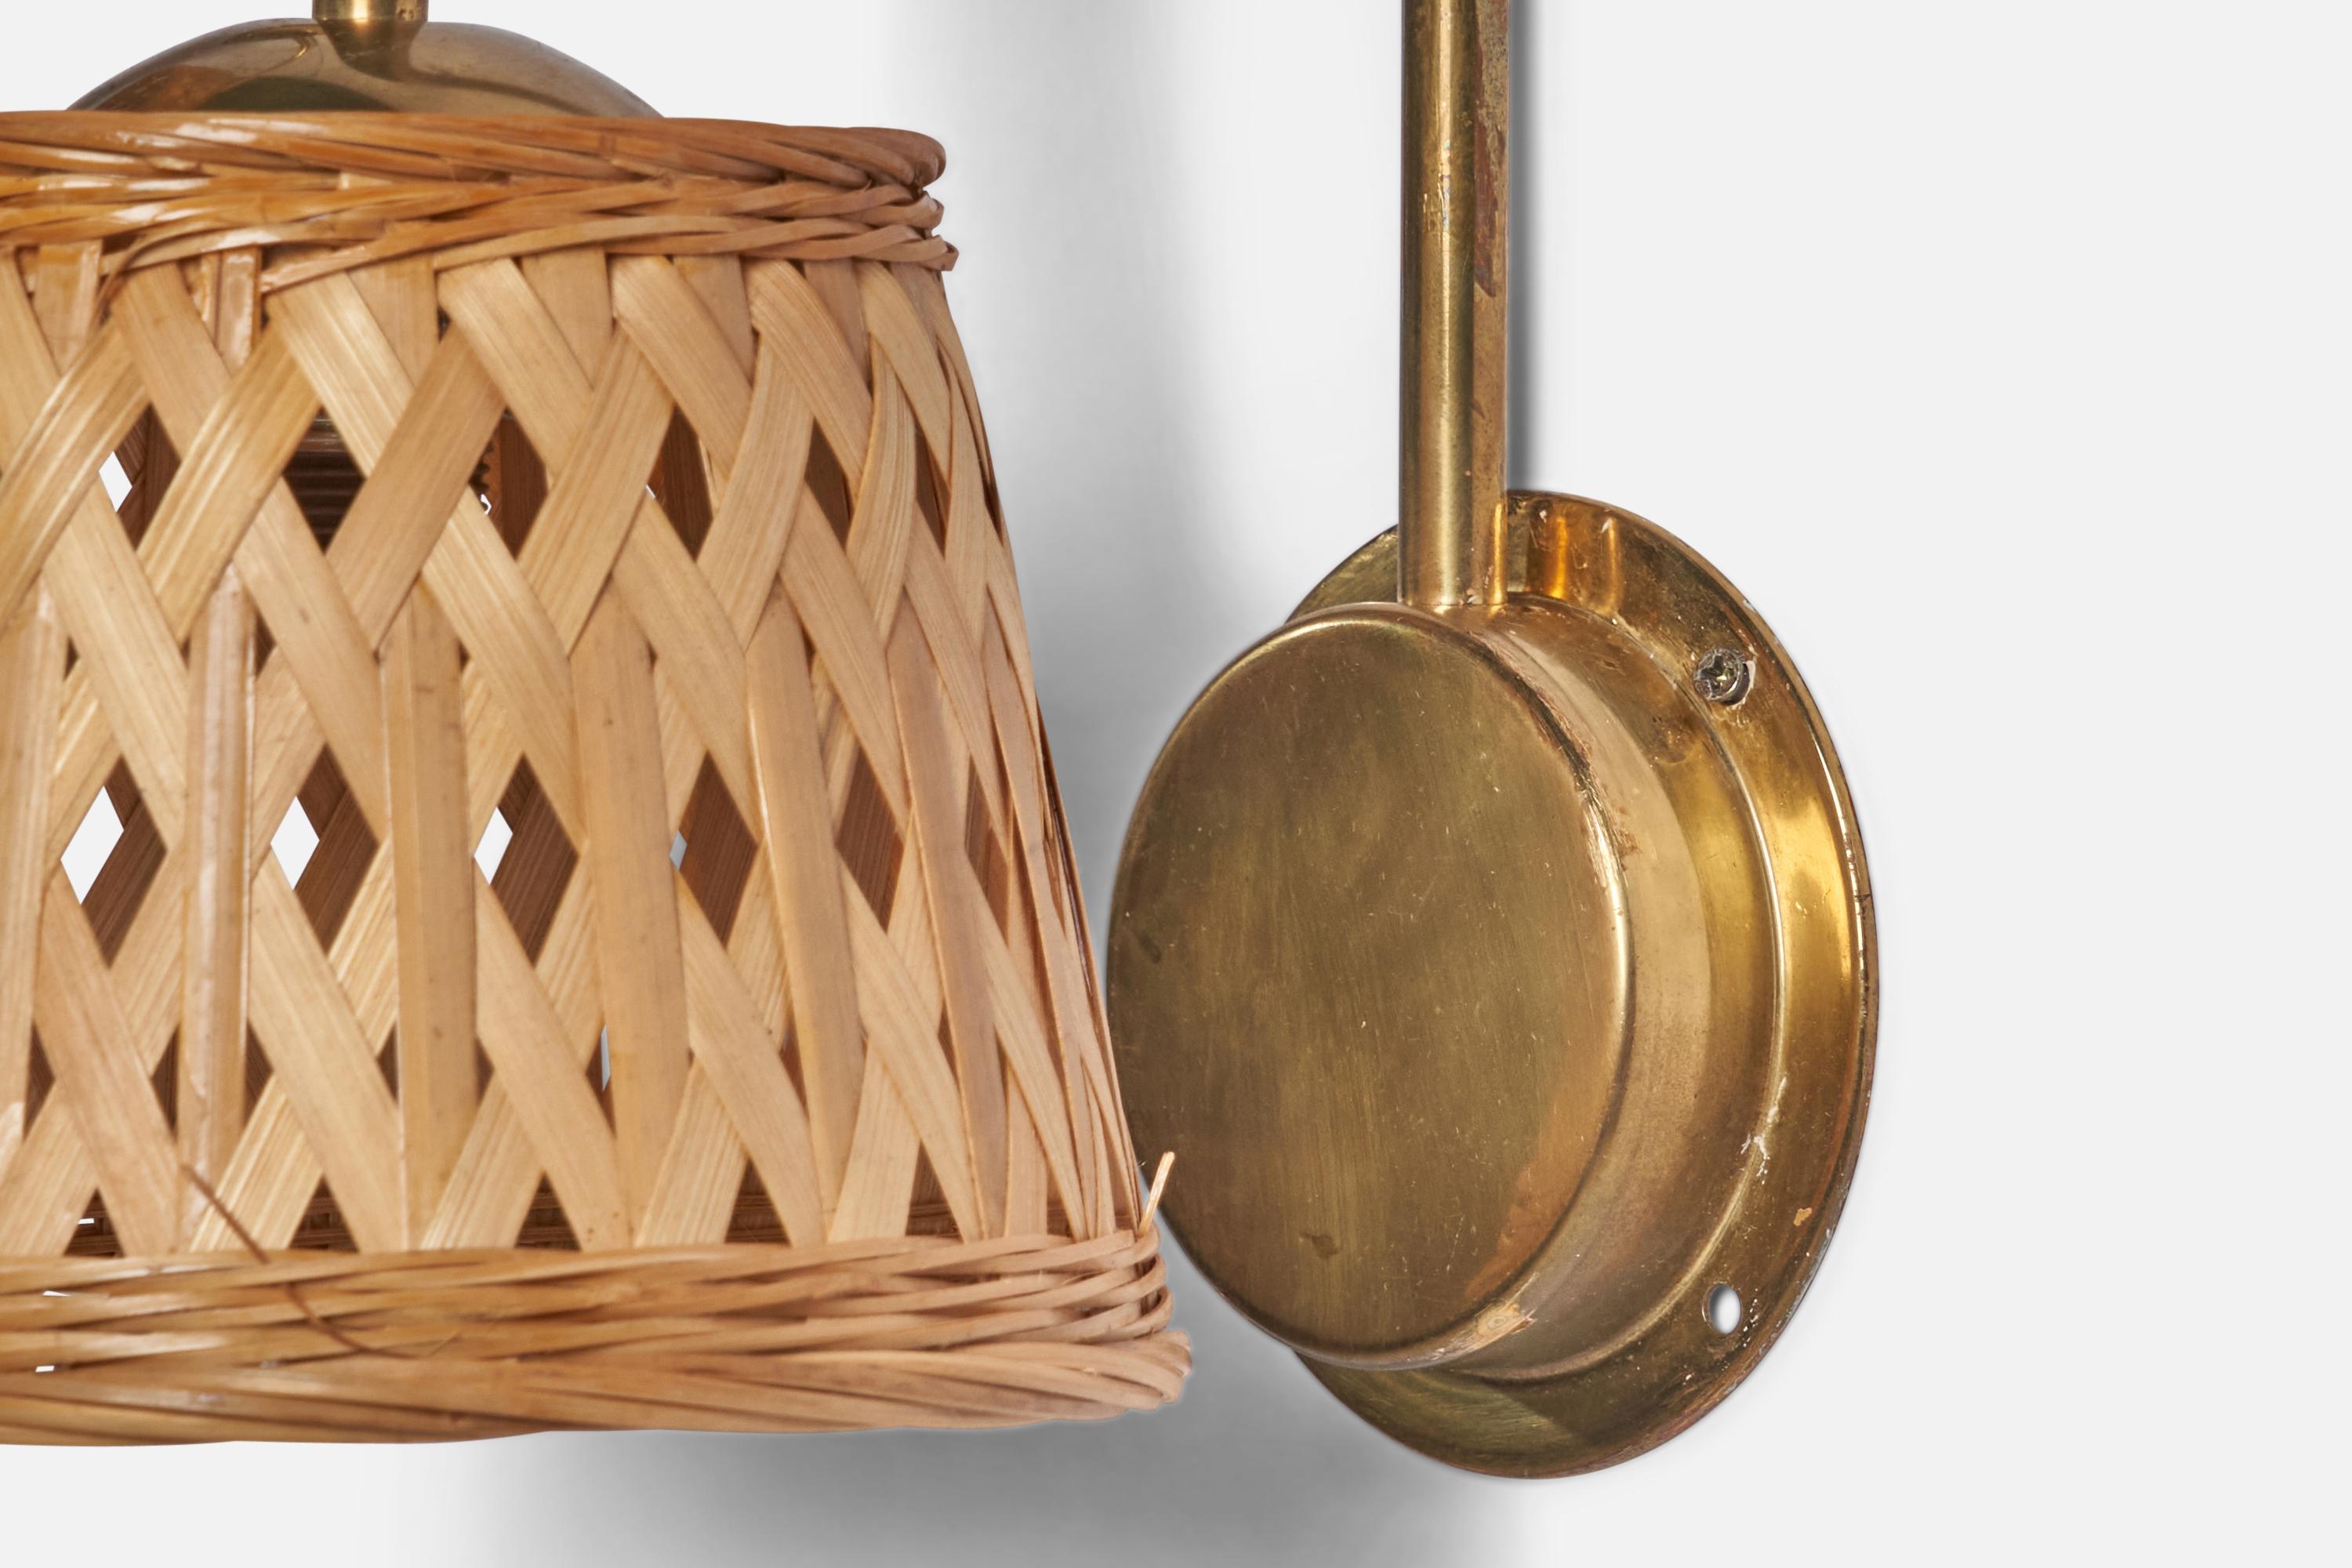 A pair of brass and rattan wall lights designed and produced in Sweden, c. 1970s.

Overall Dimensions (inches): 10” H x 7.25” W x 10” D

Back Plate Dimensions (inches): 4.25” Diameter

Bulb Specifications: E-14 Bulb

Number of Sockets: 1

All